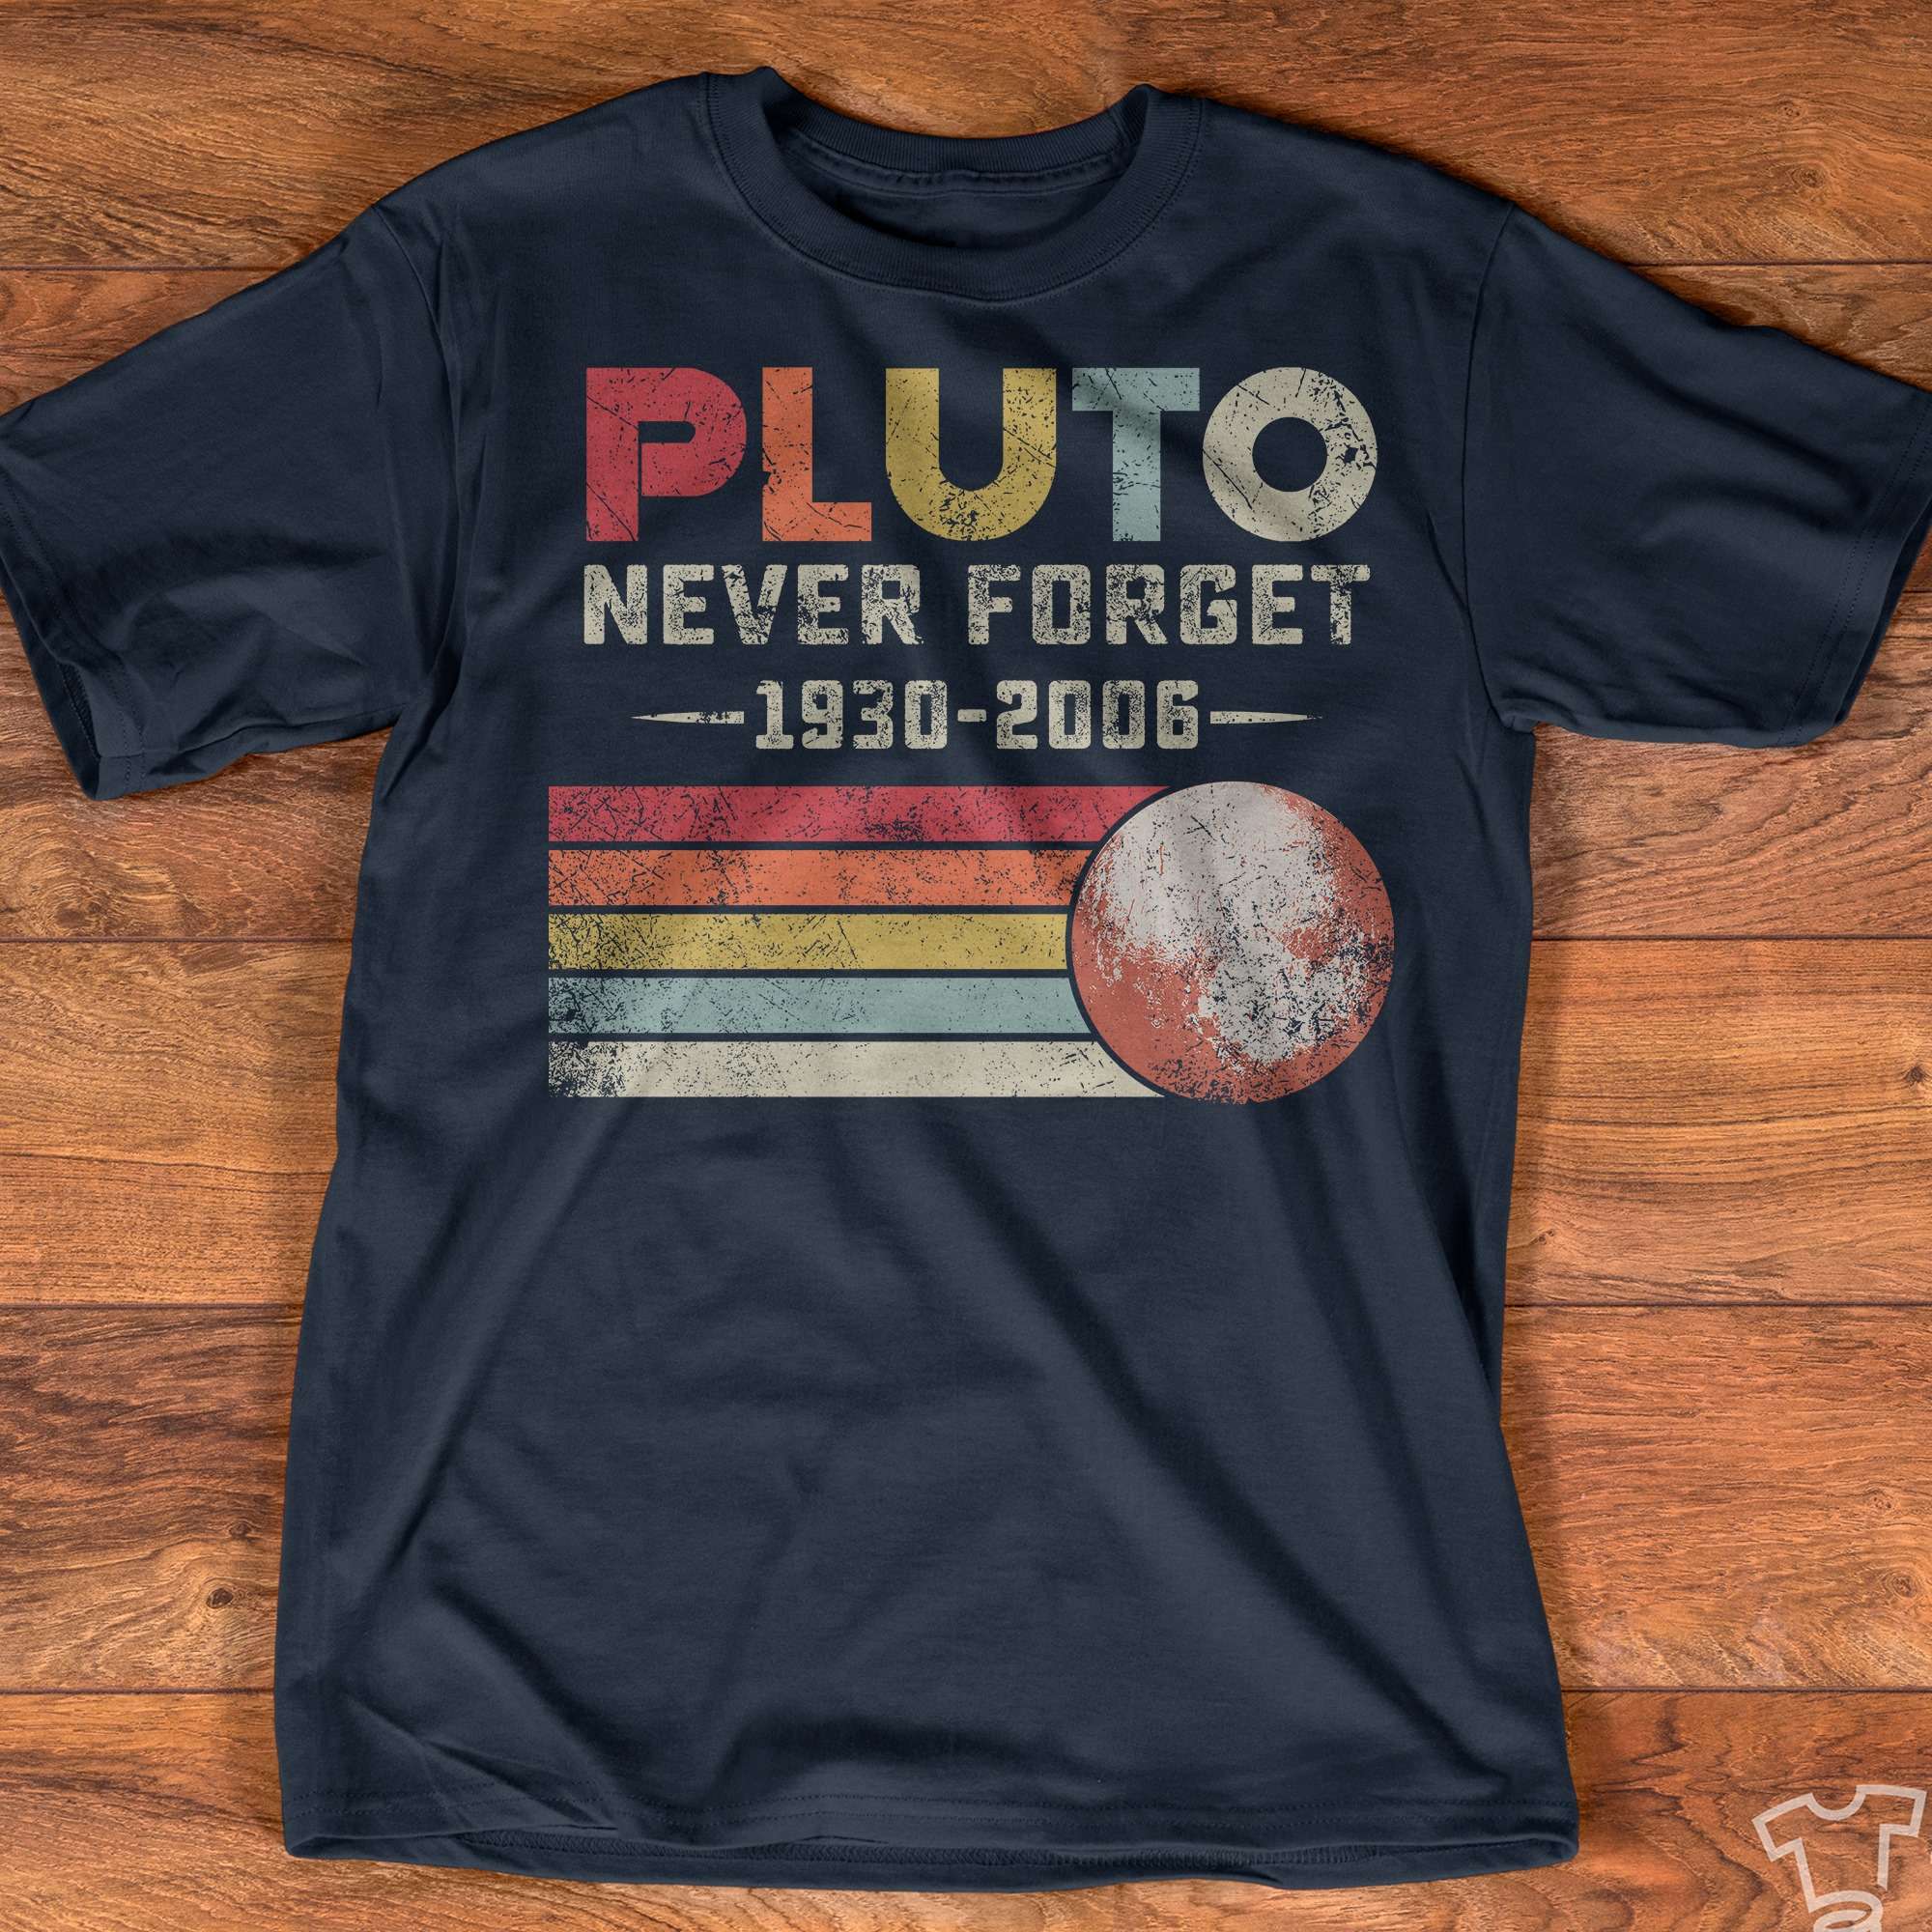 Pluto Never forget 1930-2006 - Pluto planet